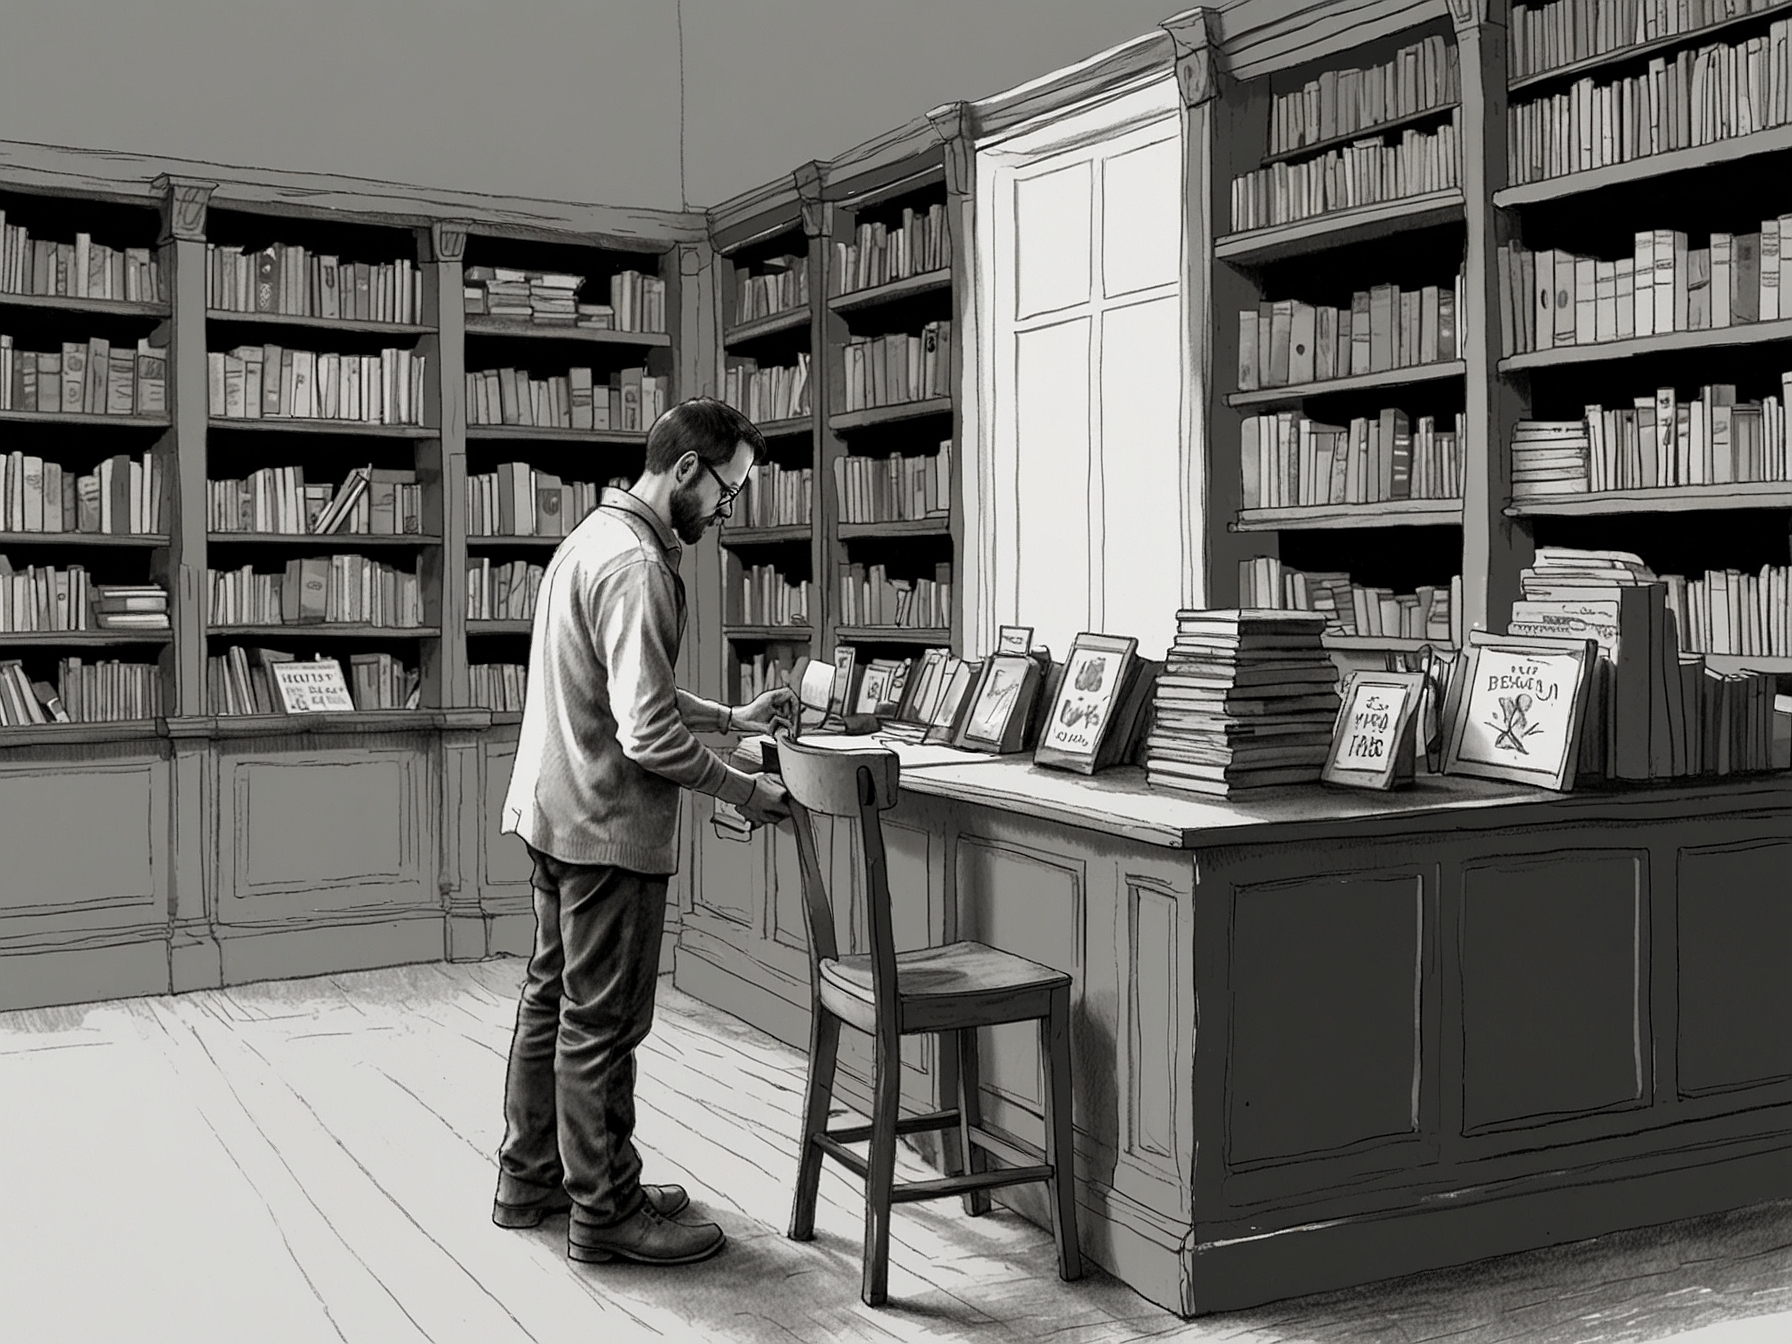 A player curating books for a customer in Tiny Bookshop, showcasing the interactive process of making personalized book recommendations based on individual preferences.